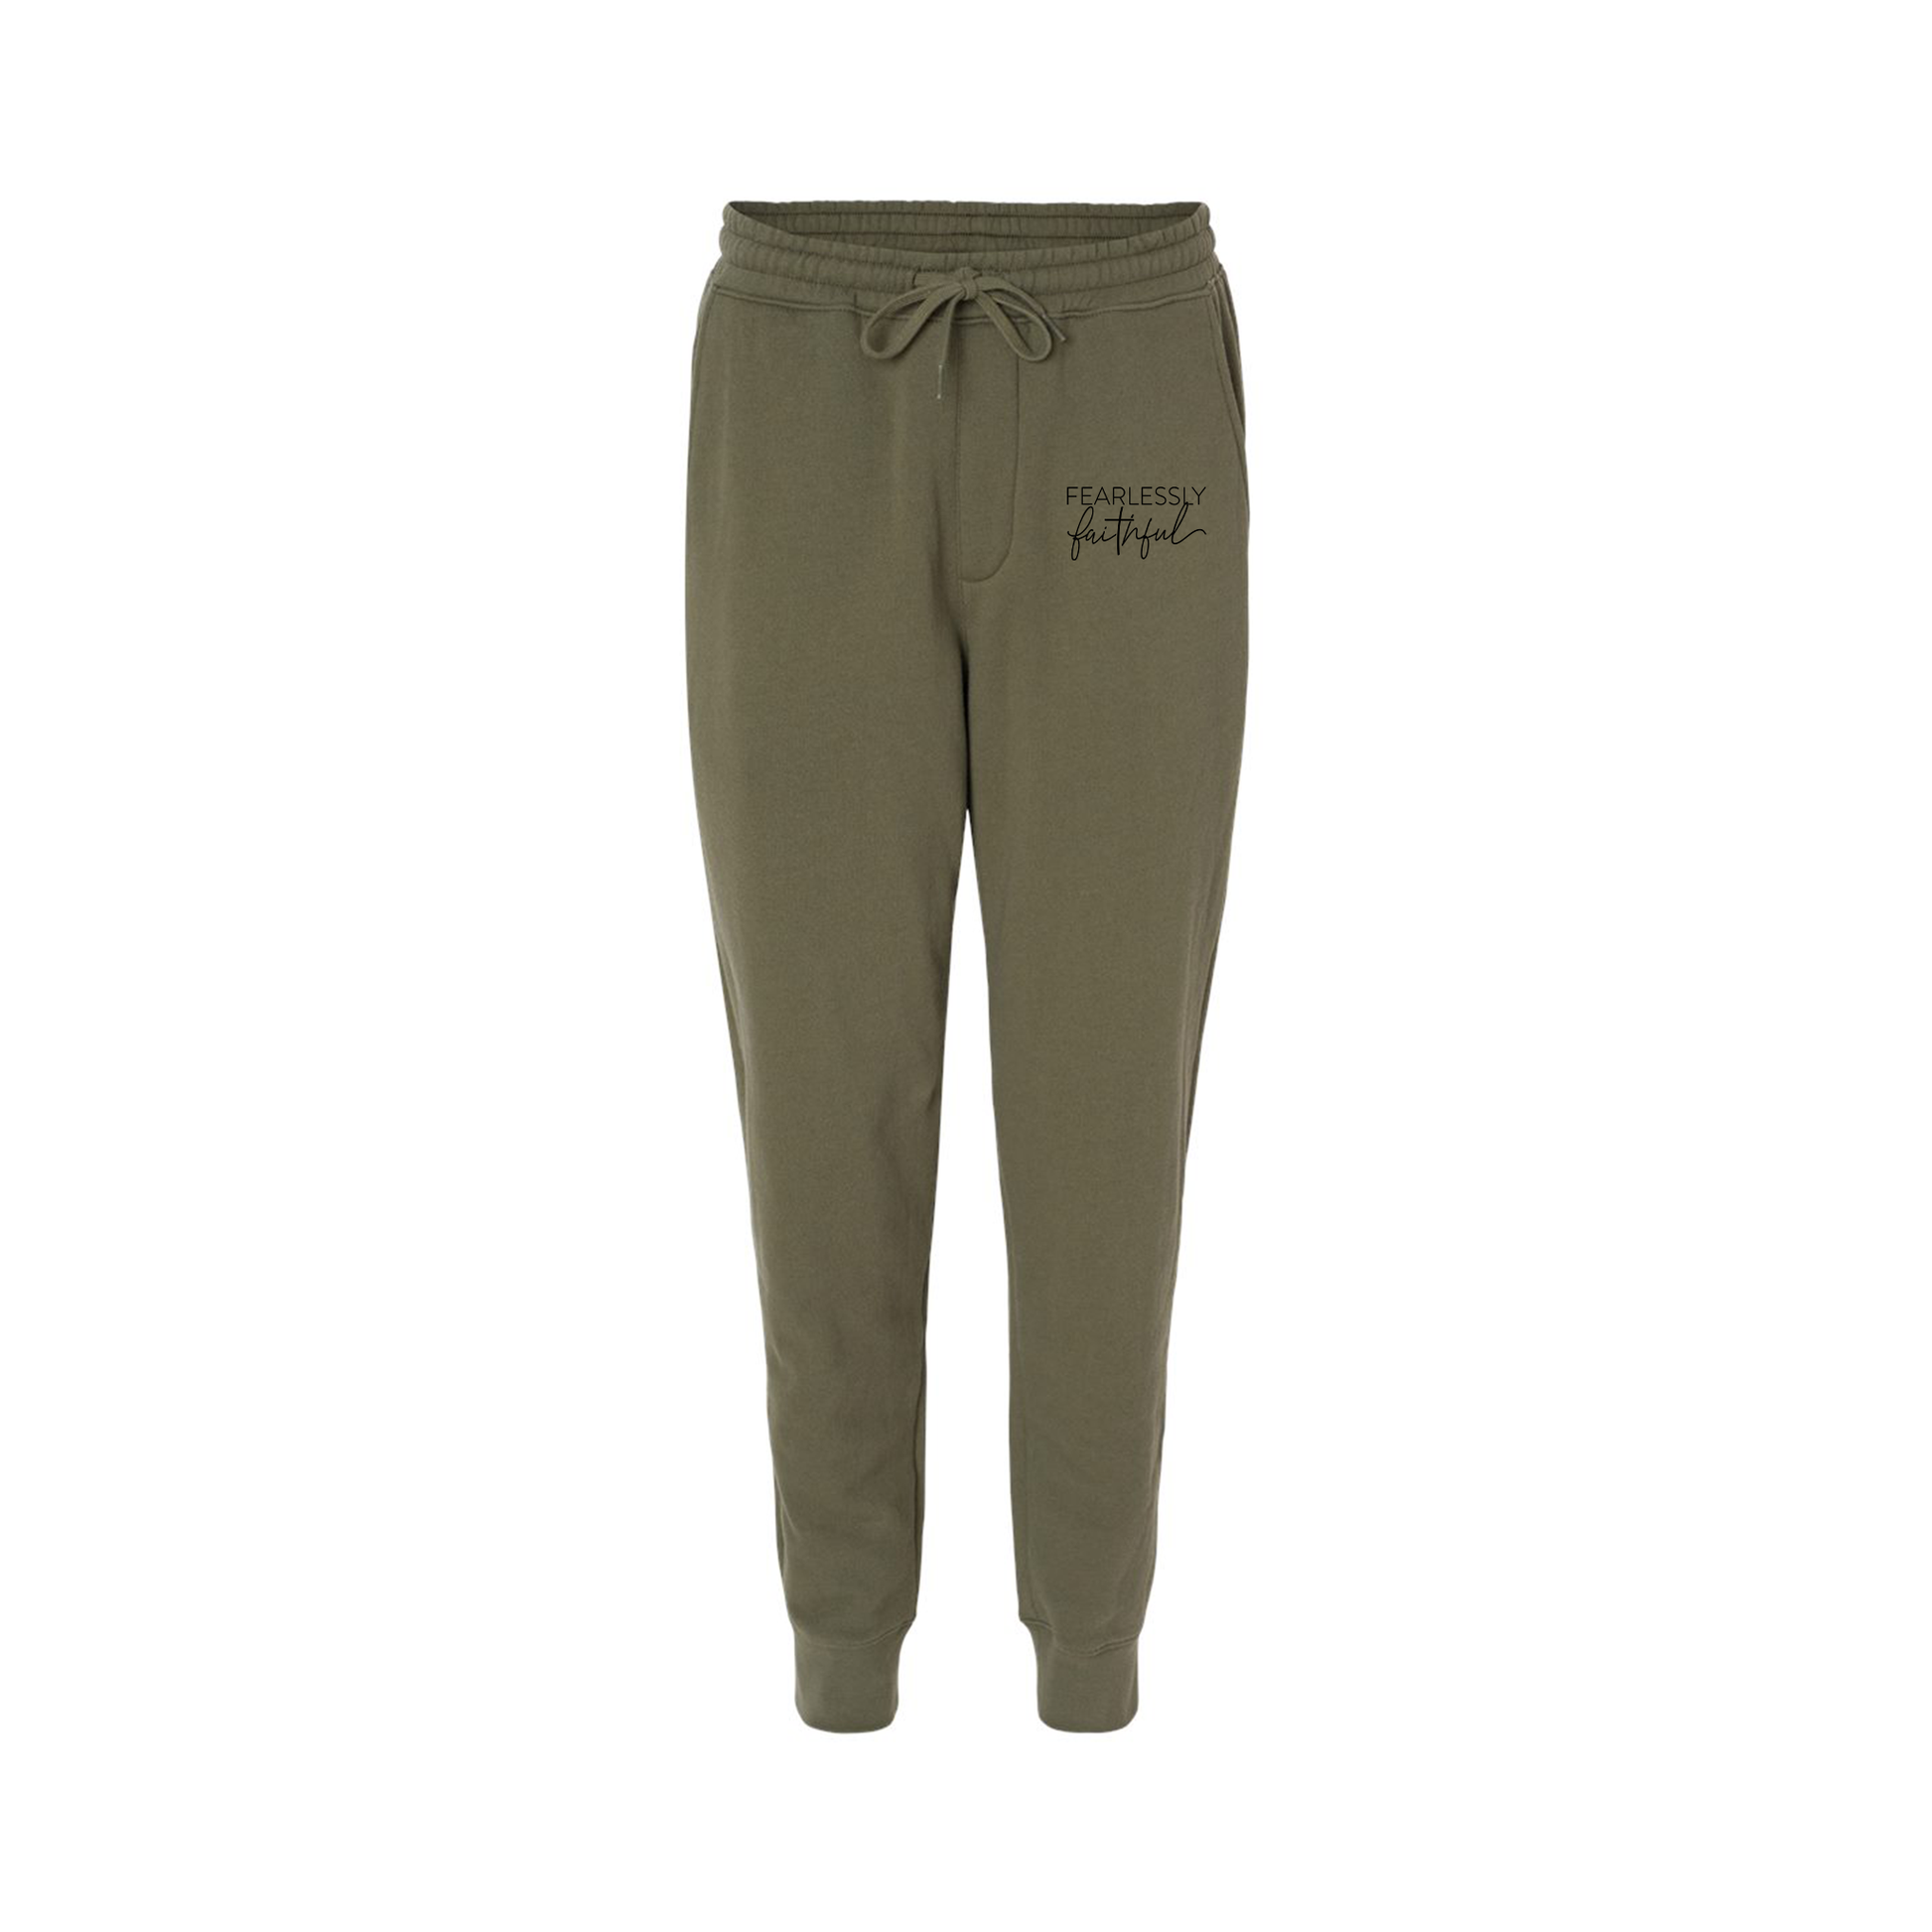 Men's Mid-Weight Sweatpants – Fearlessly Faithful